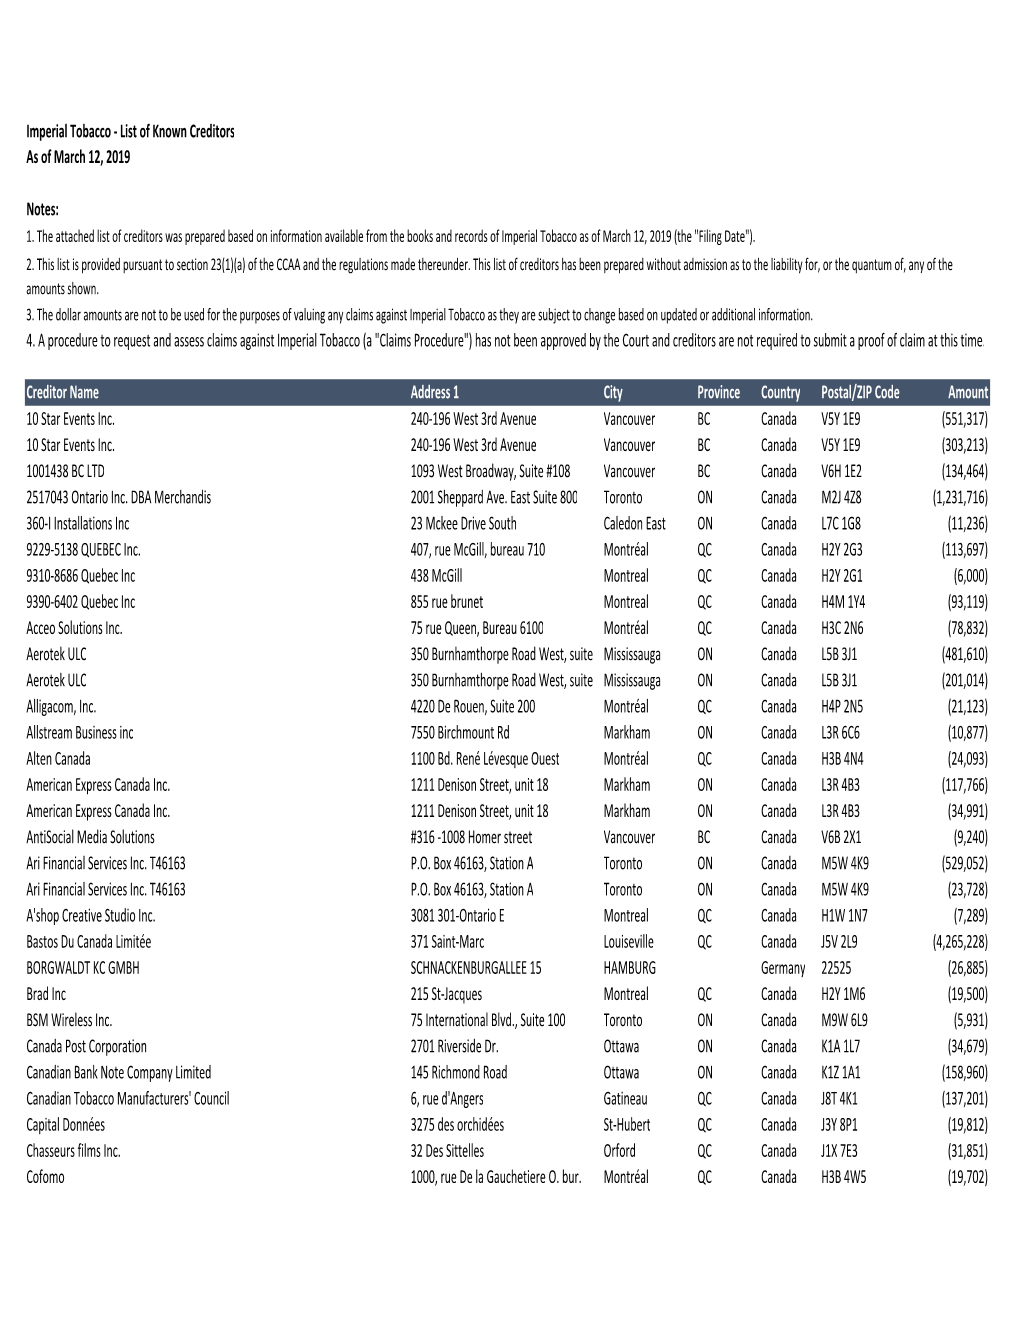 Imperial Tobacco - List of Known Creditors As of March 12, 2019